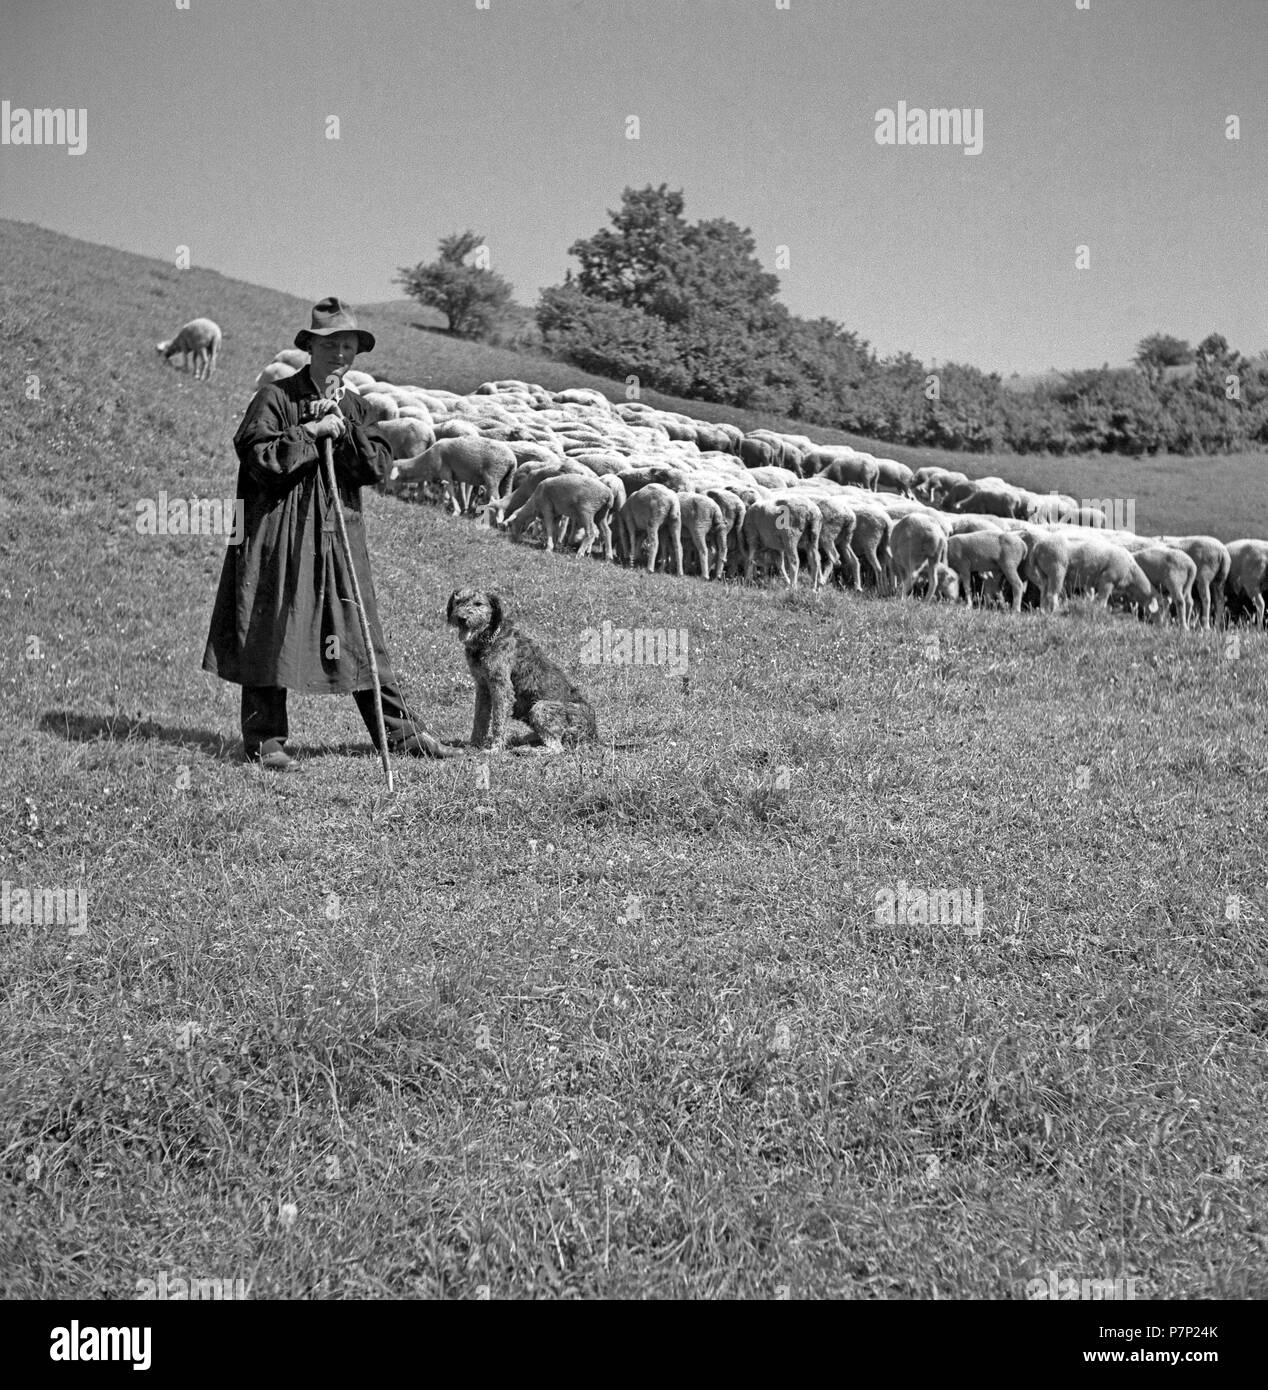 Shepherd with his flock of sheep, ca. 1945 to 1955, near Freiburg, Germany Stock Photo